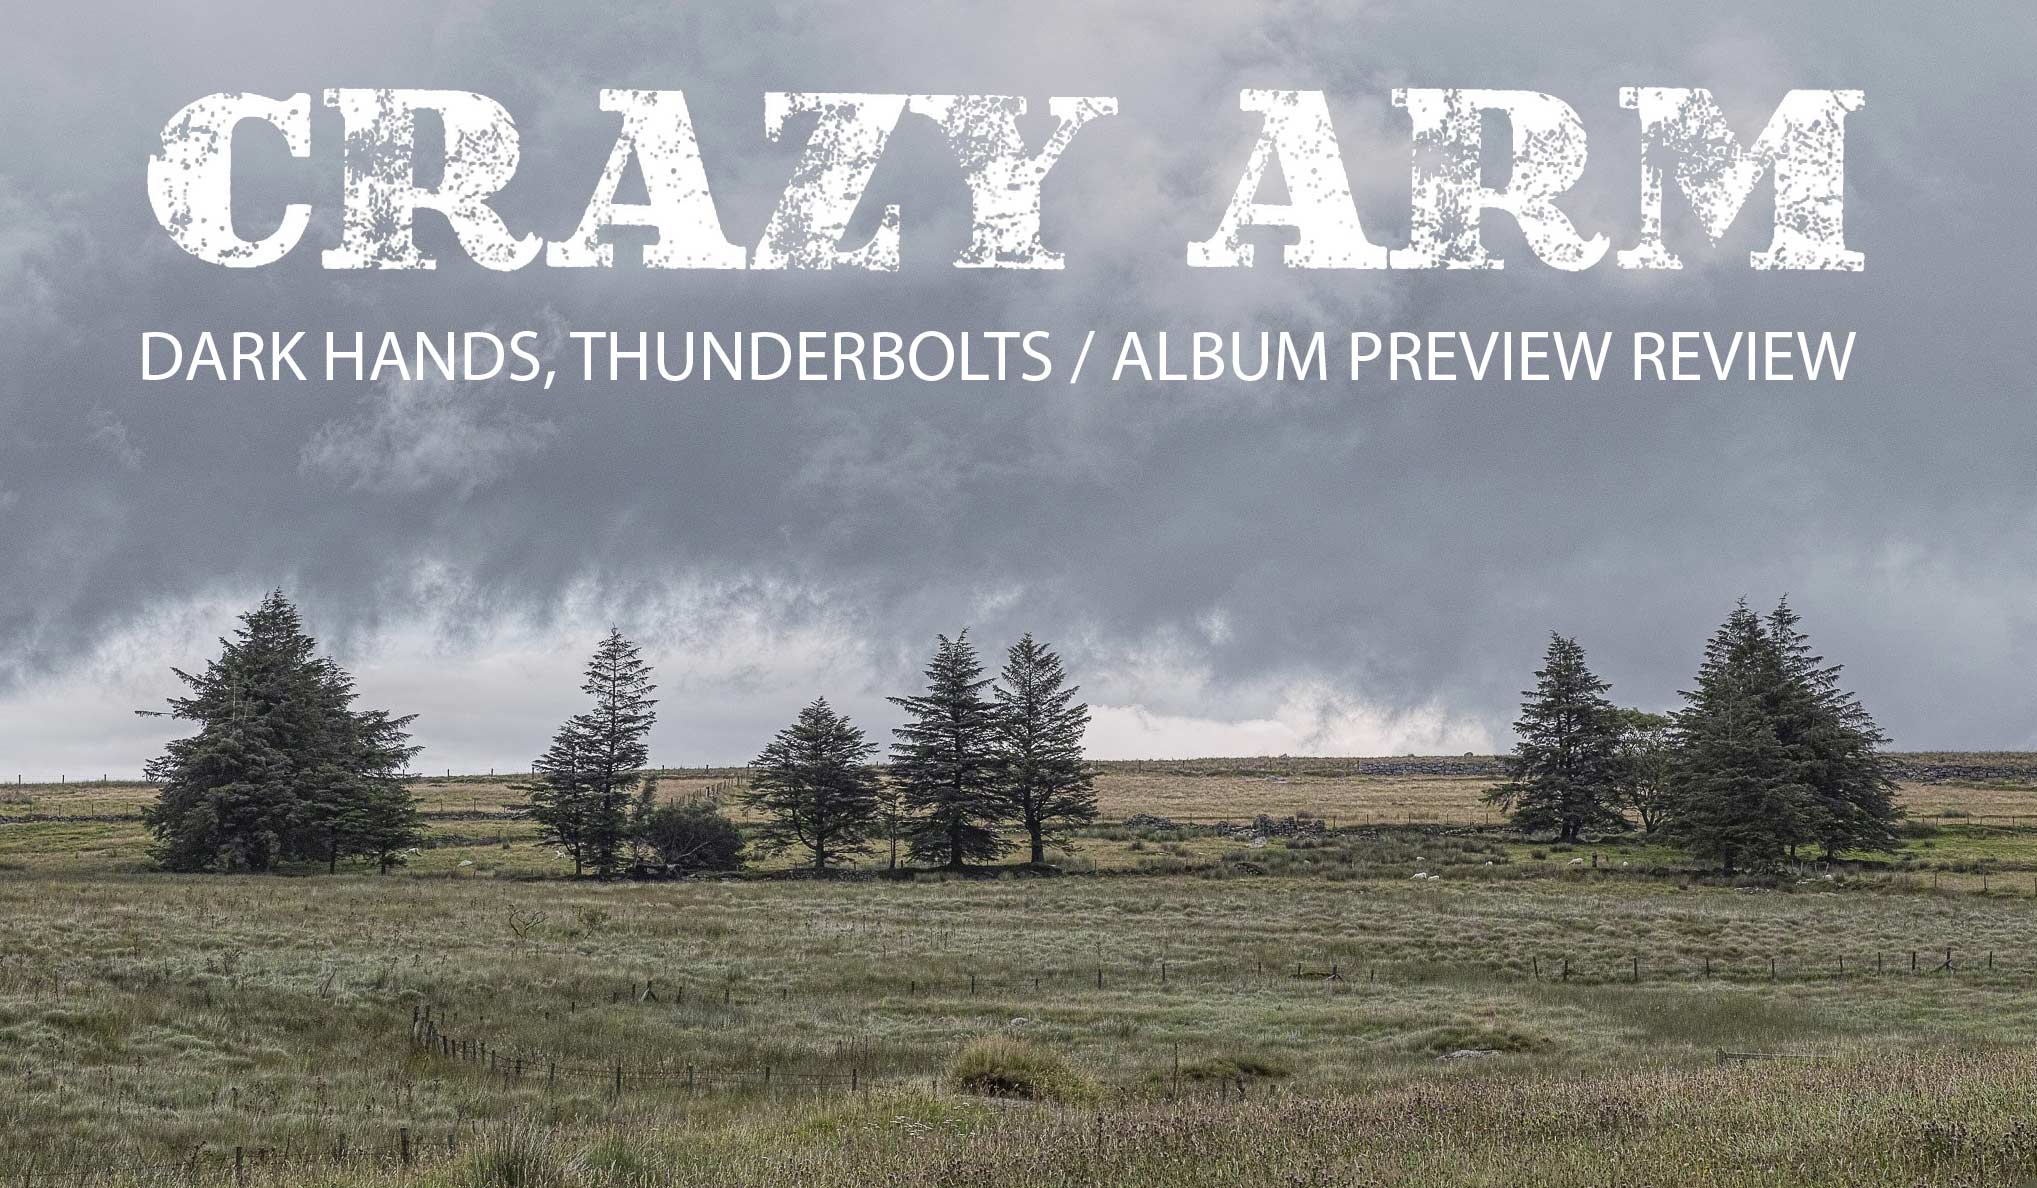 Crazy Arm streamed a debut of their fourth LP 'Dark Hands, Thunderbolts' on 25th MAY 2020